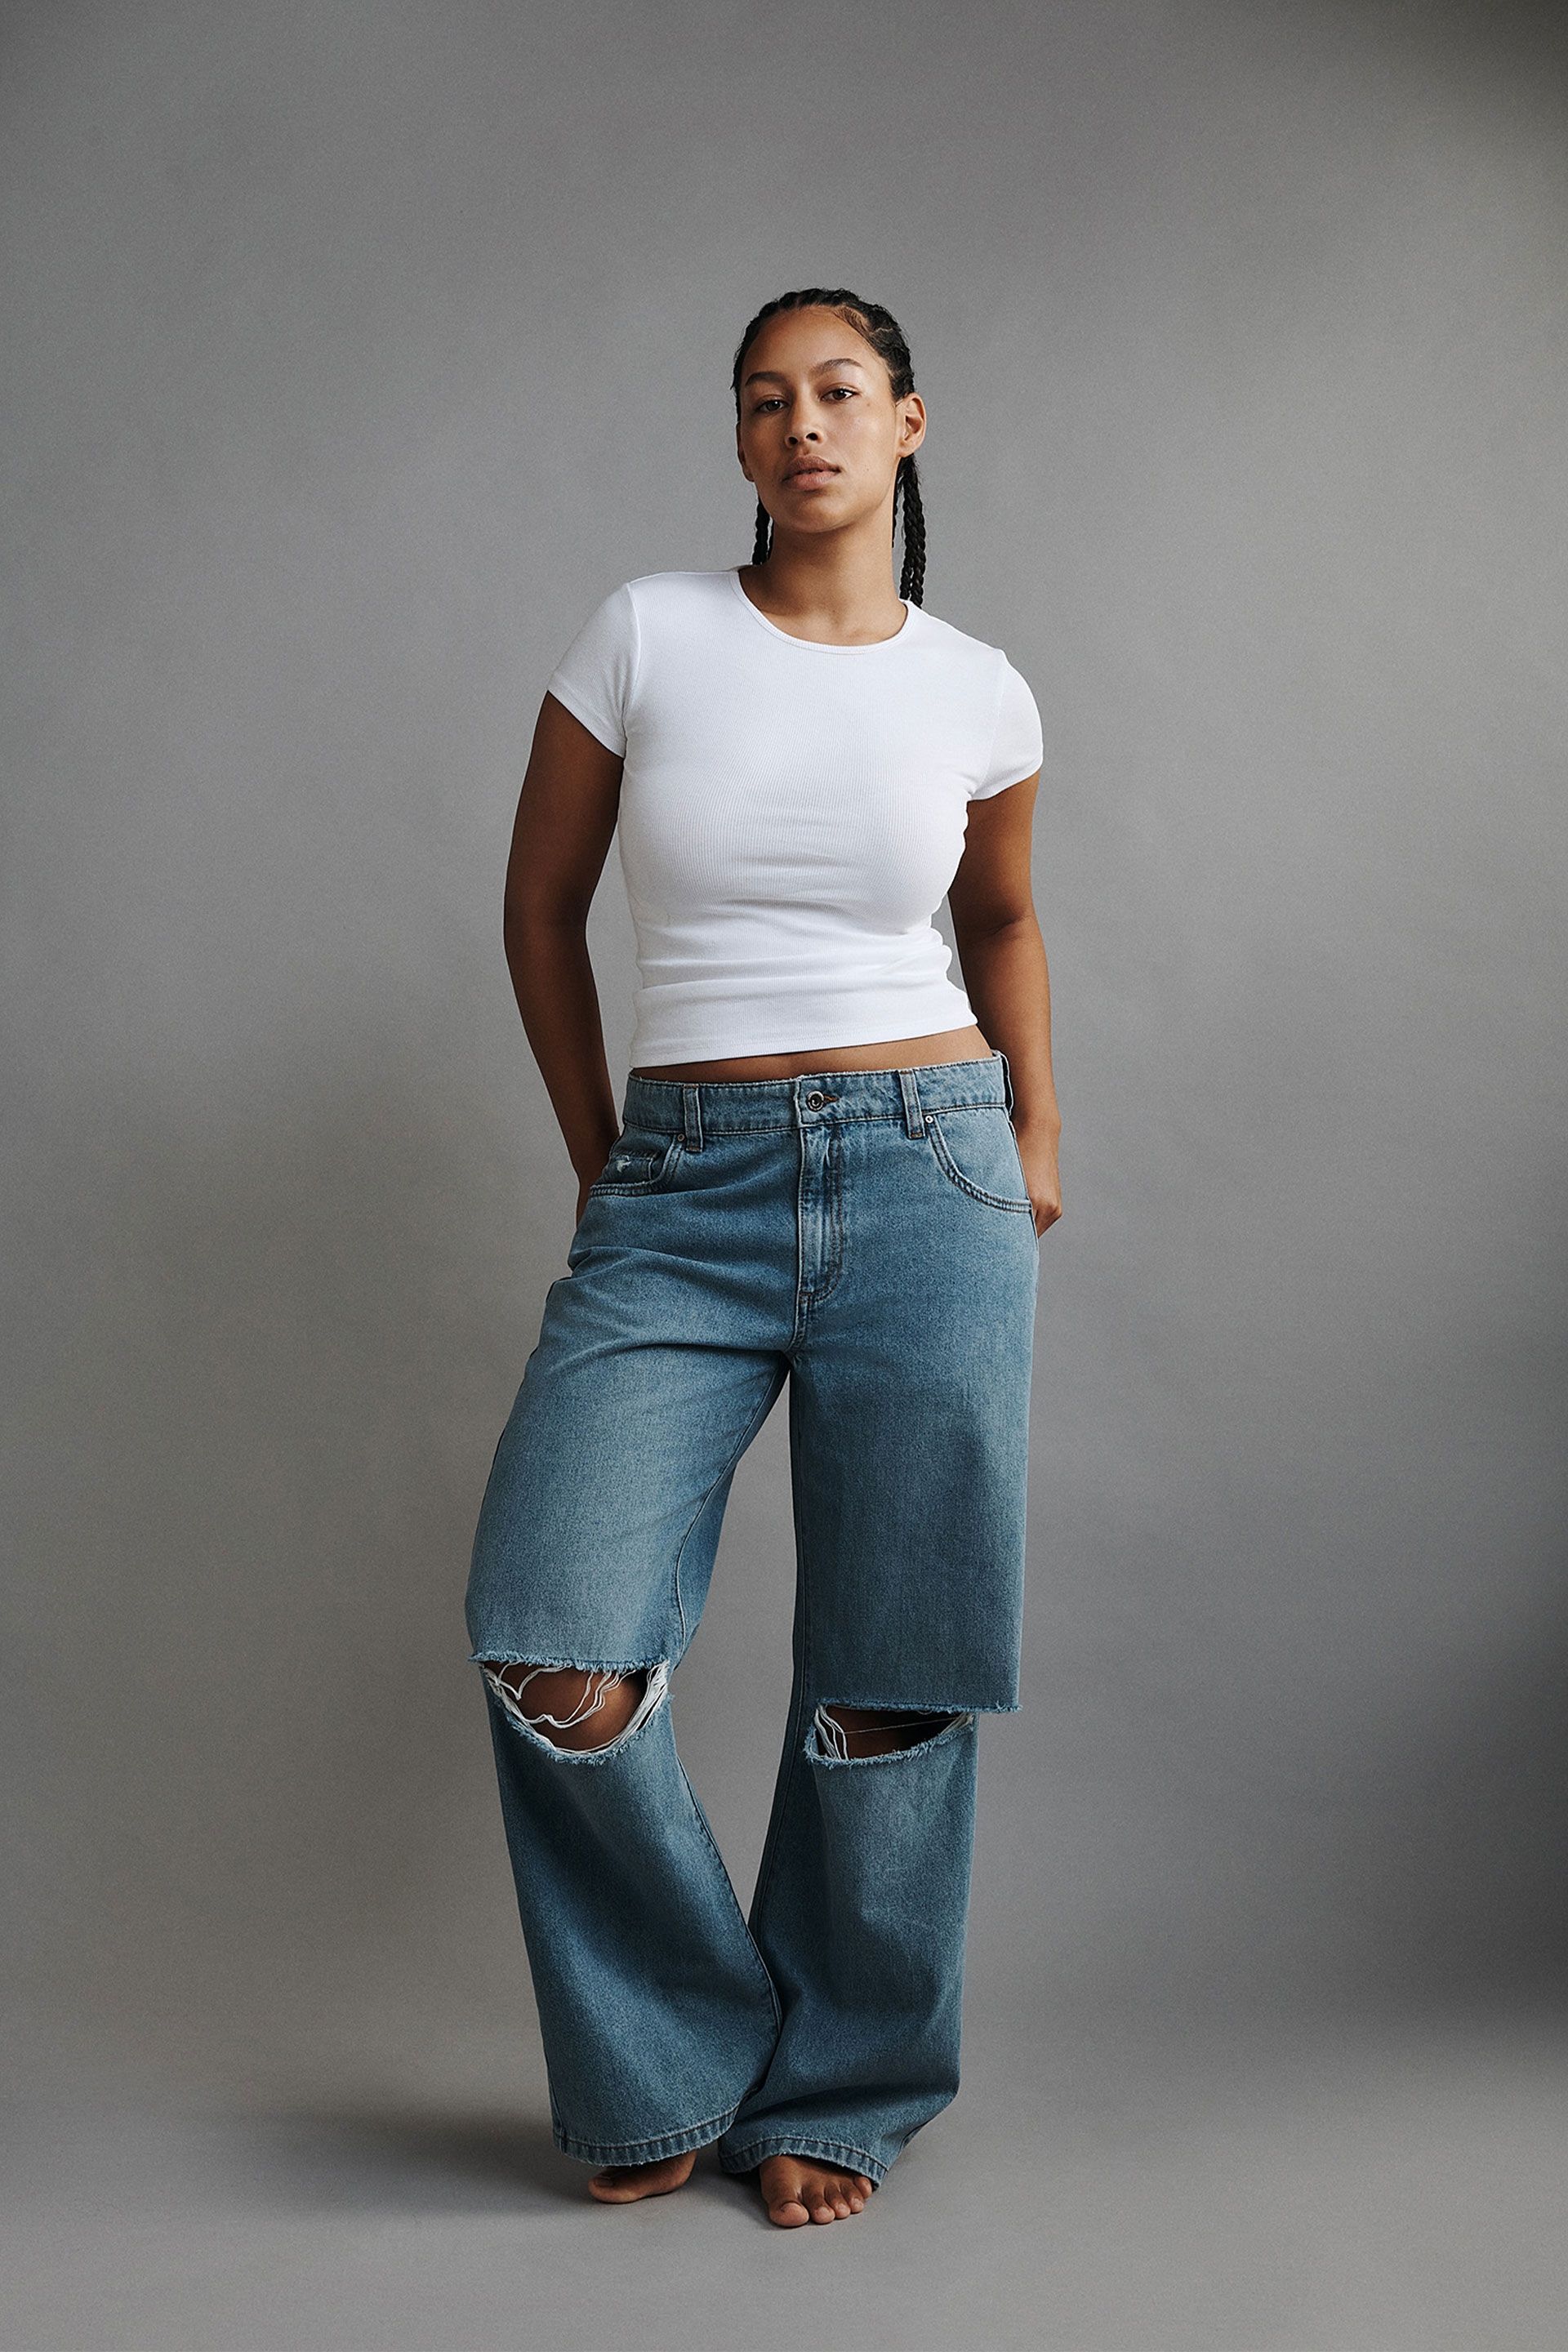 5 Loose-Fitting Jeans Every Woman Needs in Her Closet Right Now – Sourcing  Journal